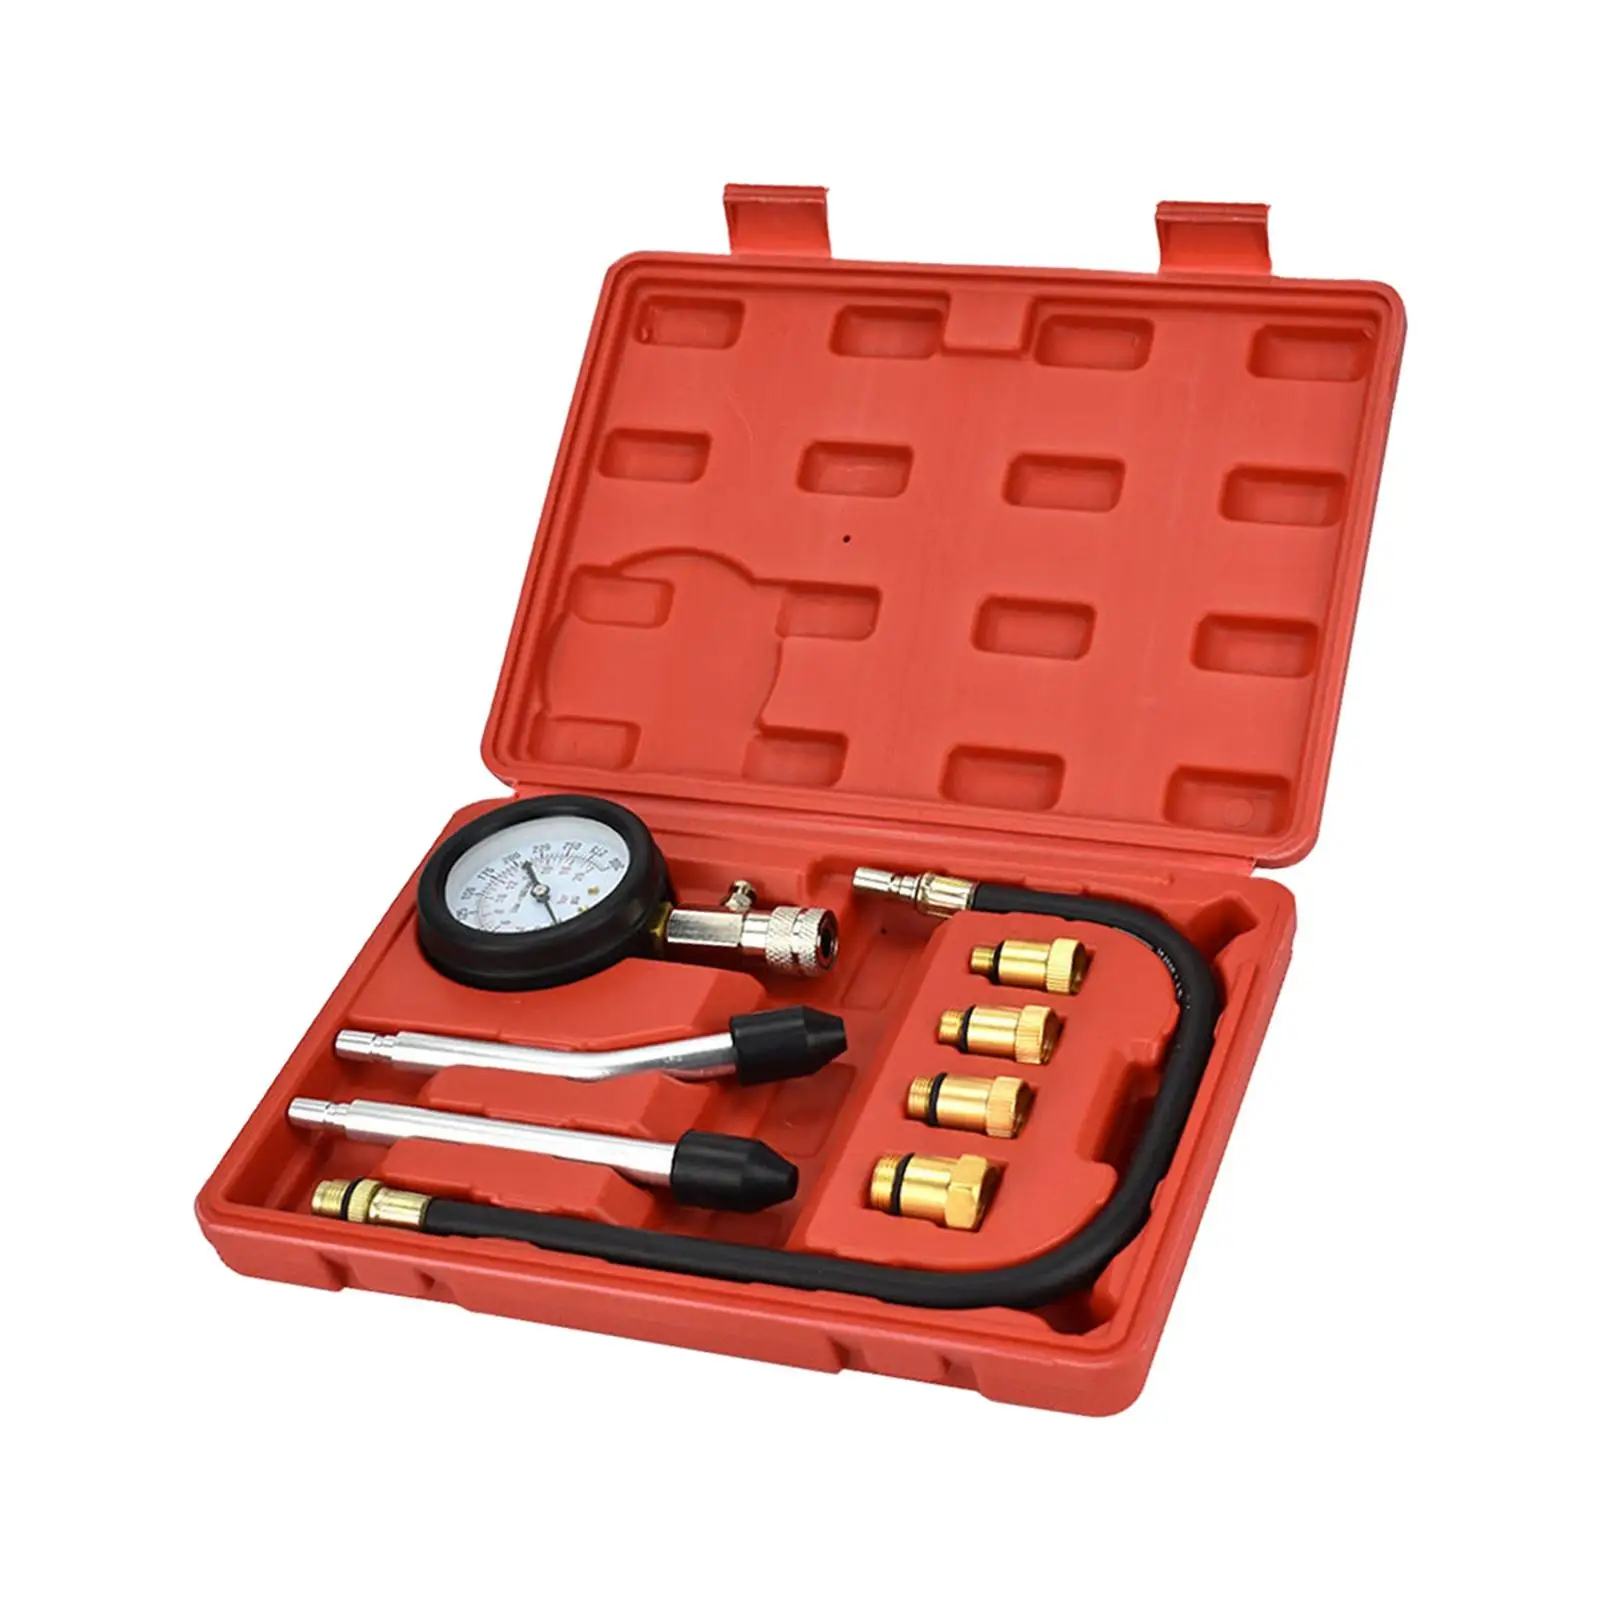 Set of 8 Petrol Engine Cylinder Compression Tester Tool with Carrying Case